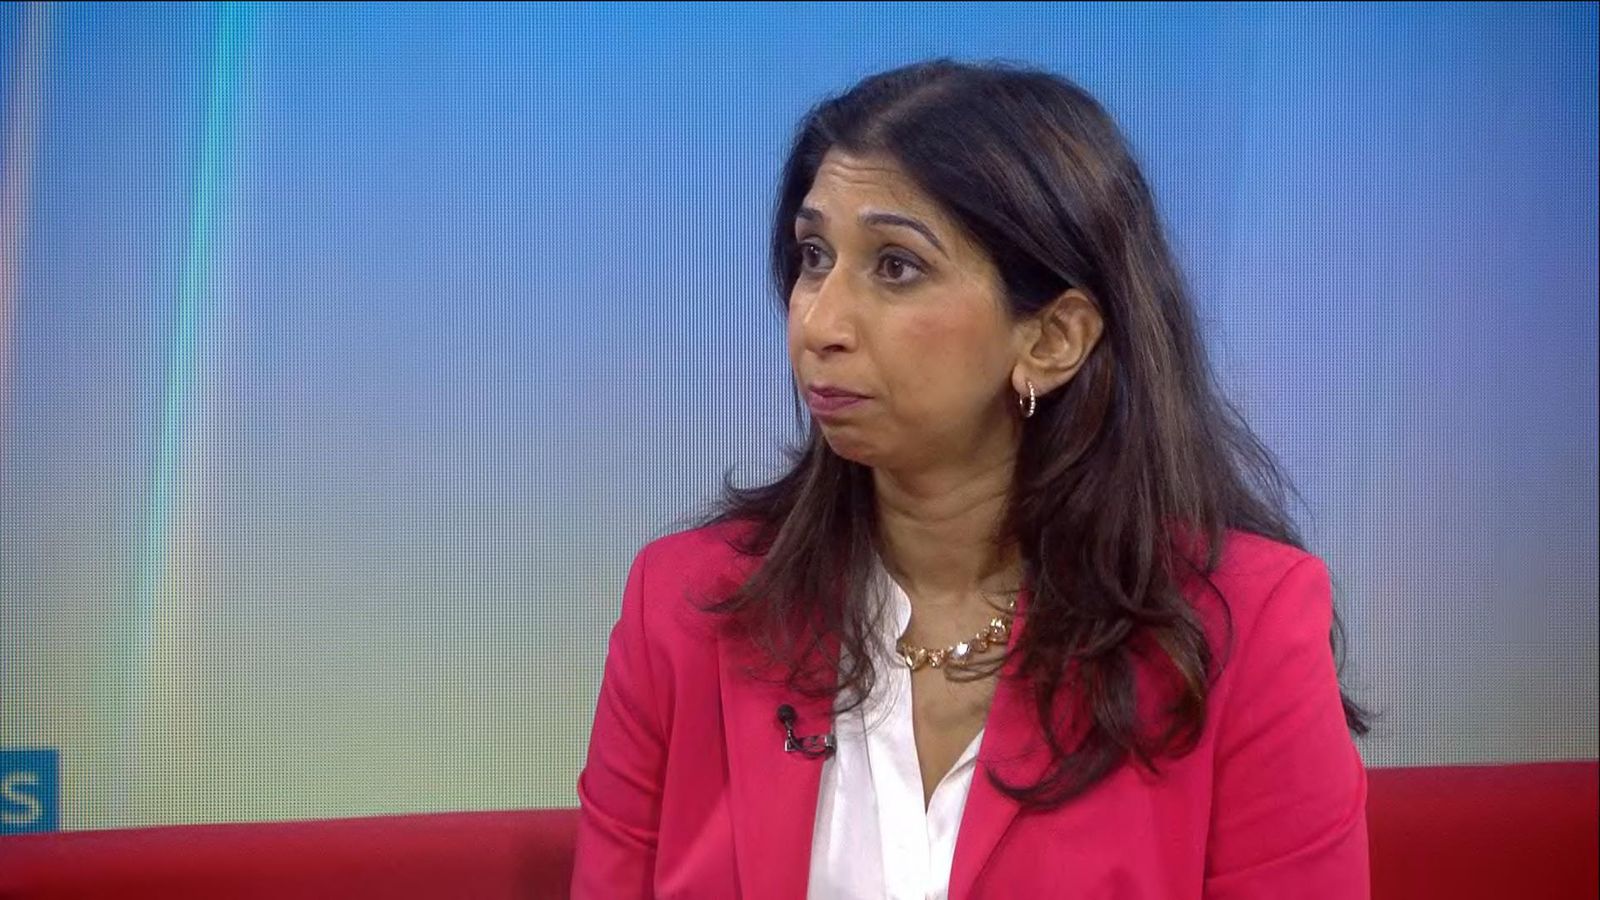 Climate change: Home secretary Suella Braverman on net zero pledges: 'We're not going to save the planet by bankrupting Britons'